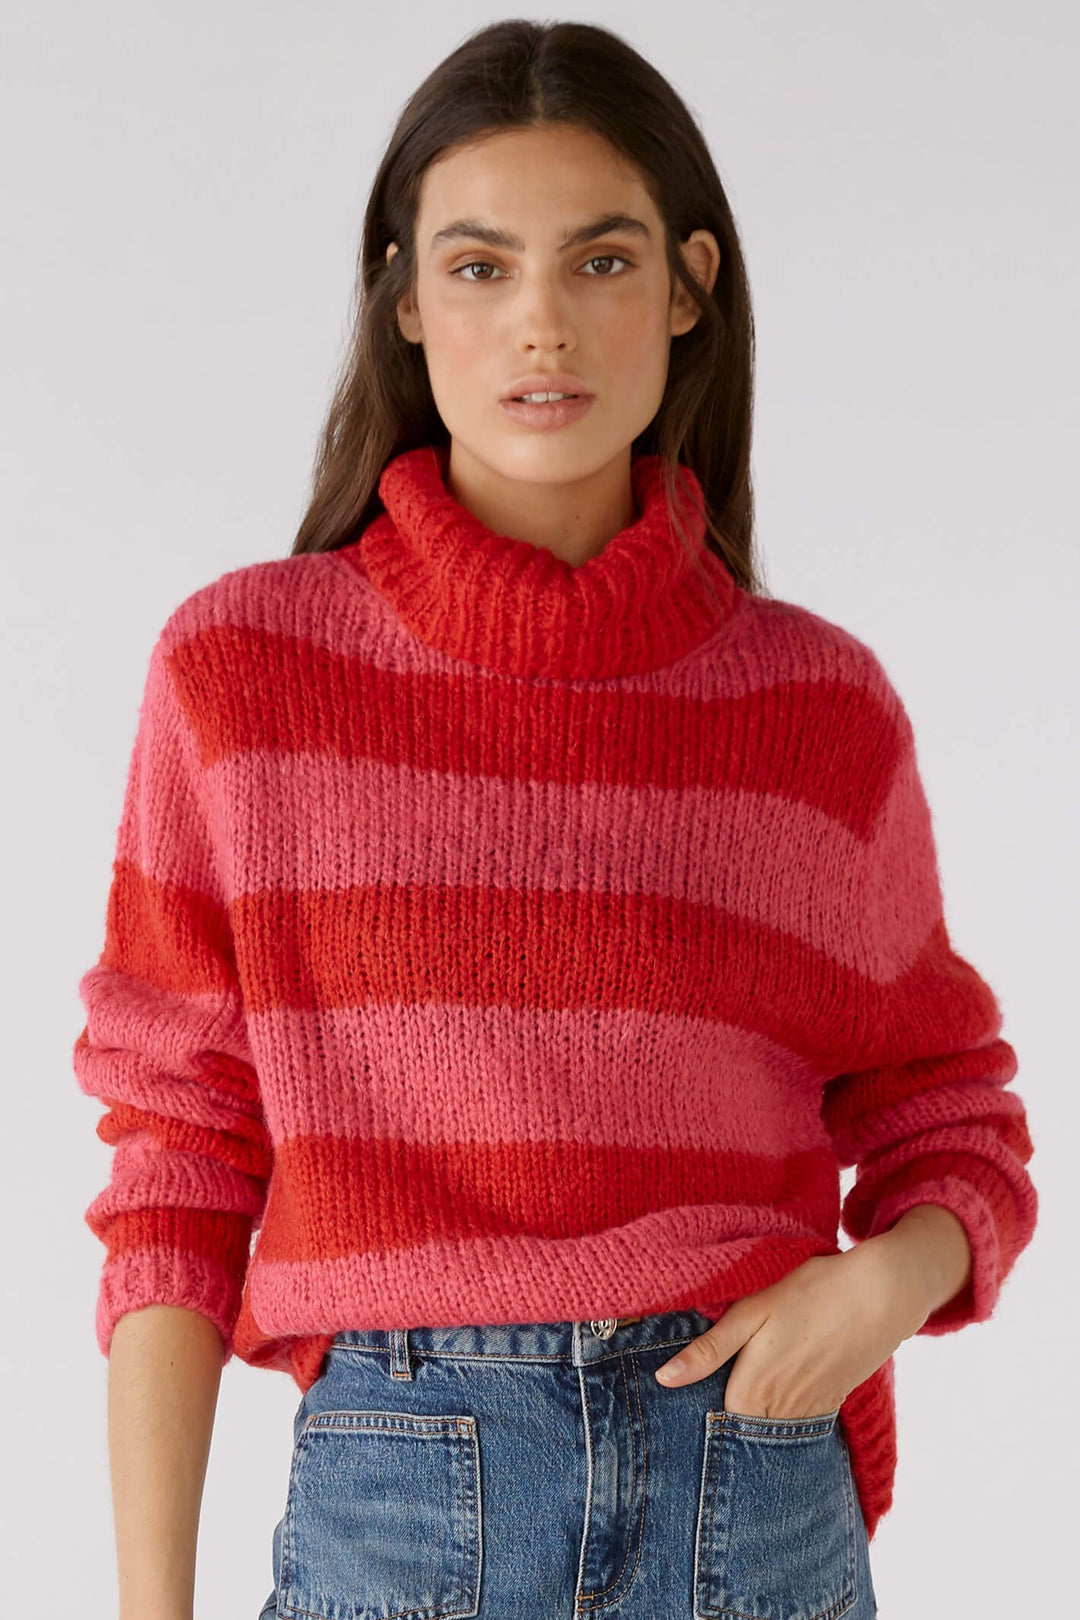 Oui 79577 Red Rose Stripe Roll Neck Jumper - Dotique Chesterfield